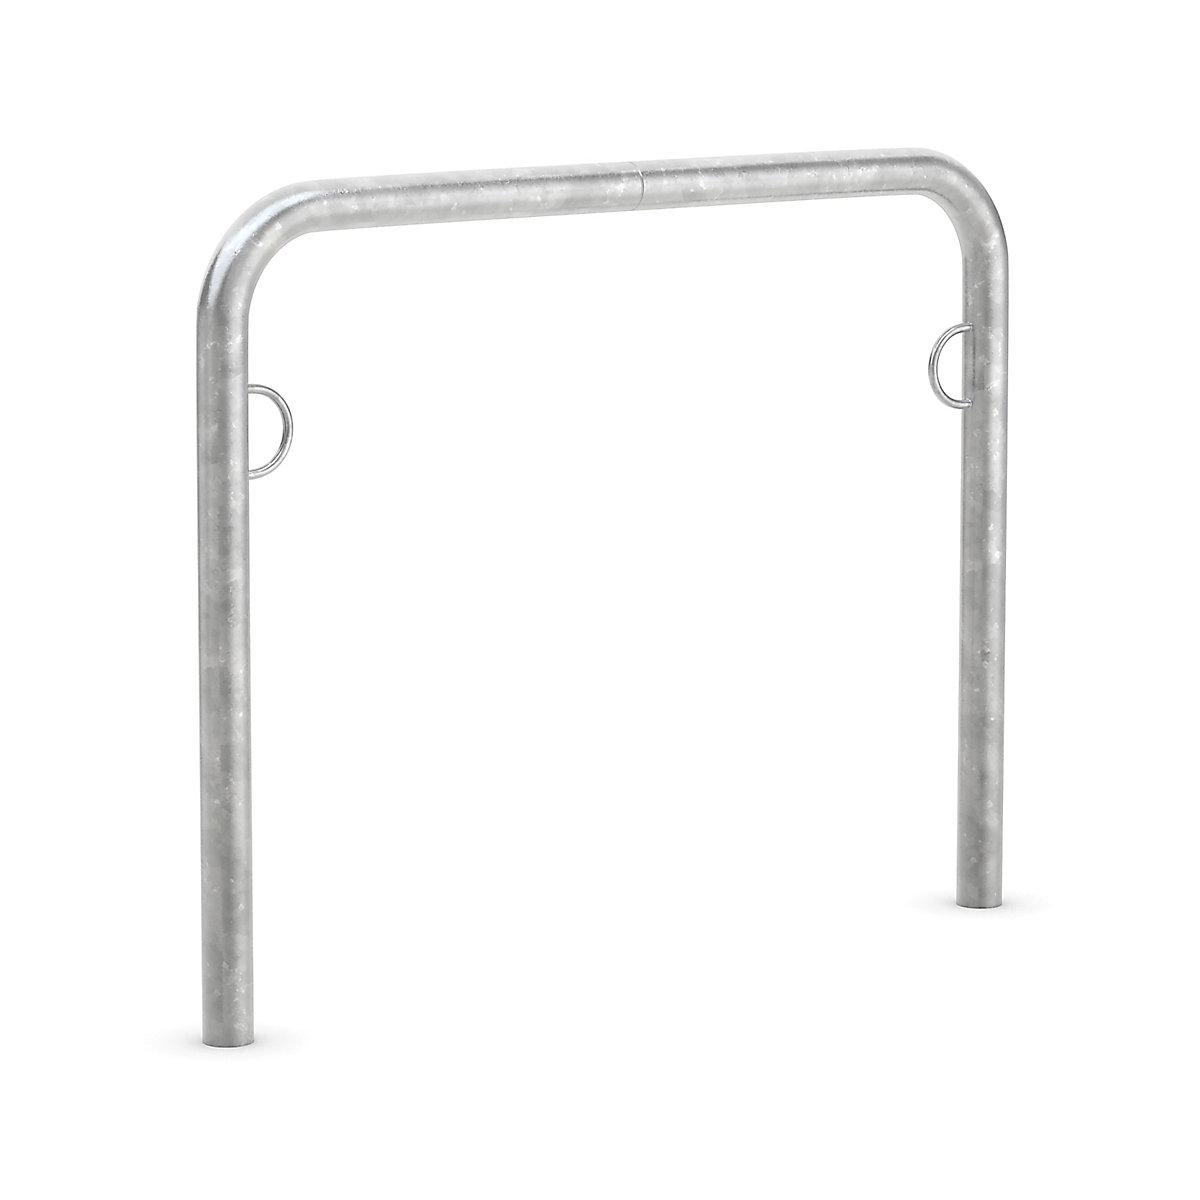 TRUST bicycle parker, for concreting in, width 1000 mm, pack of 1-3